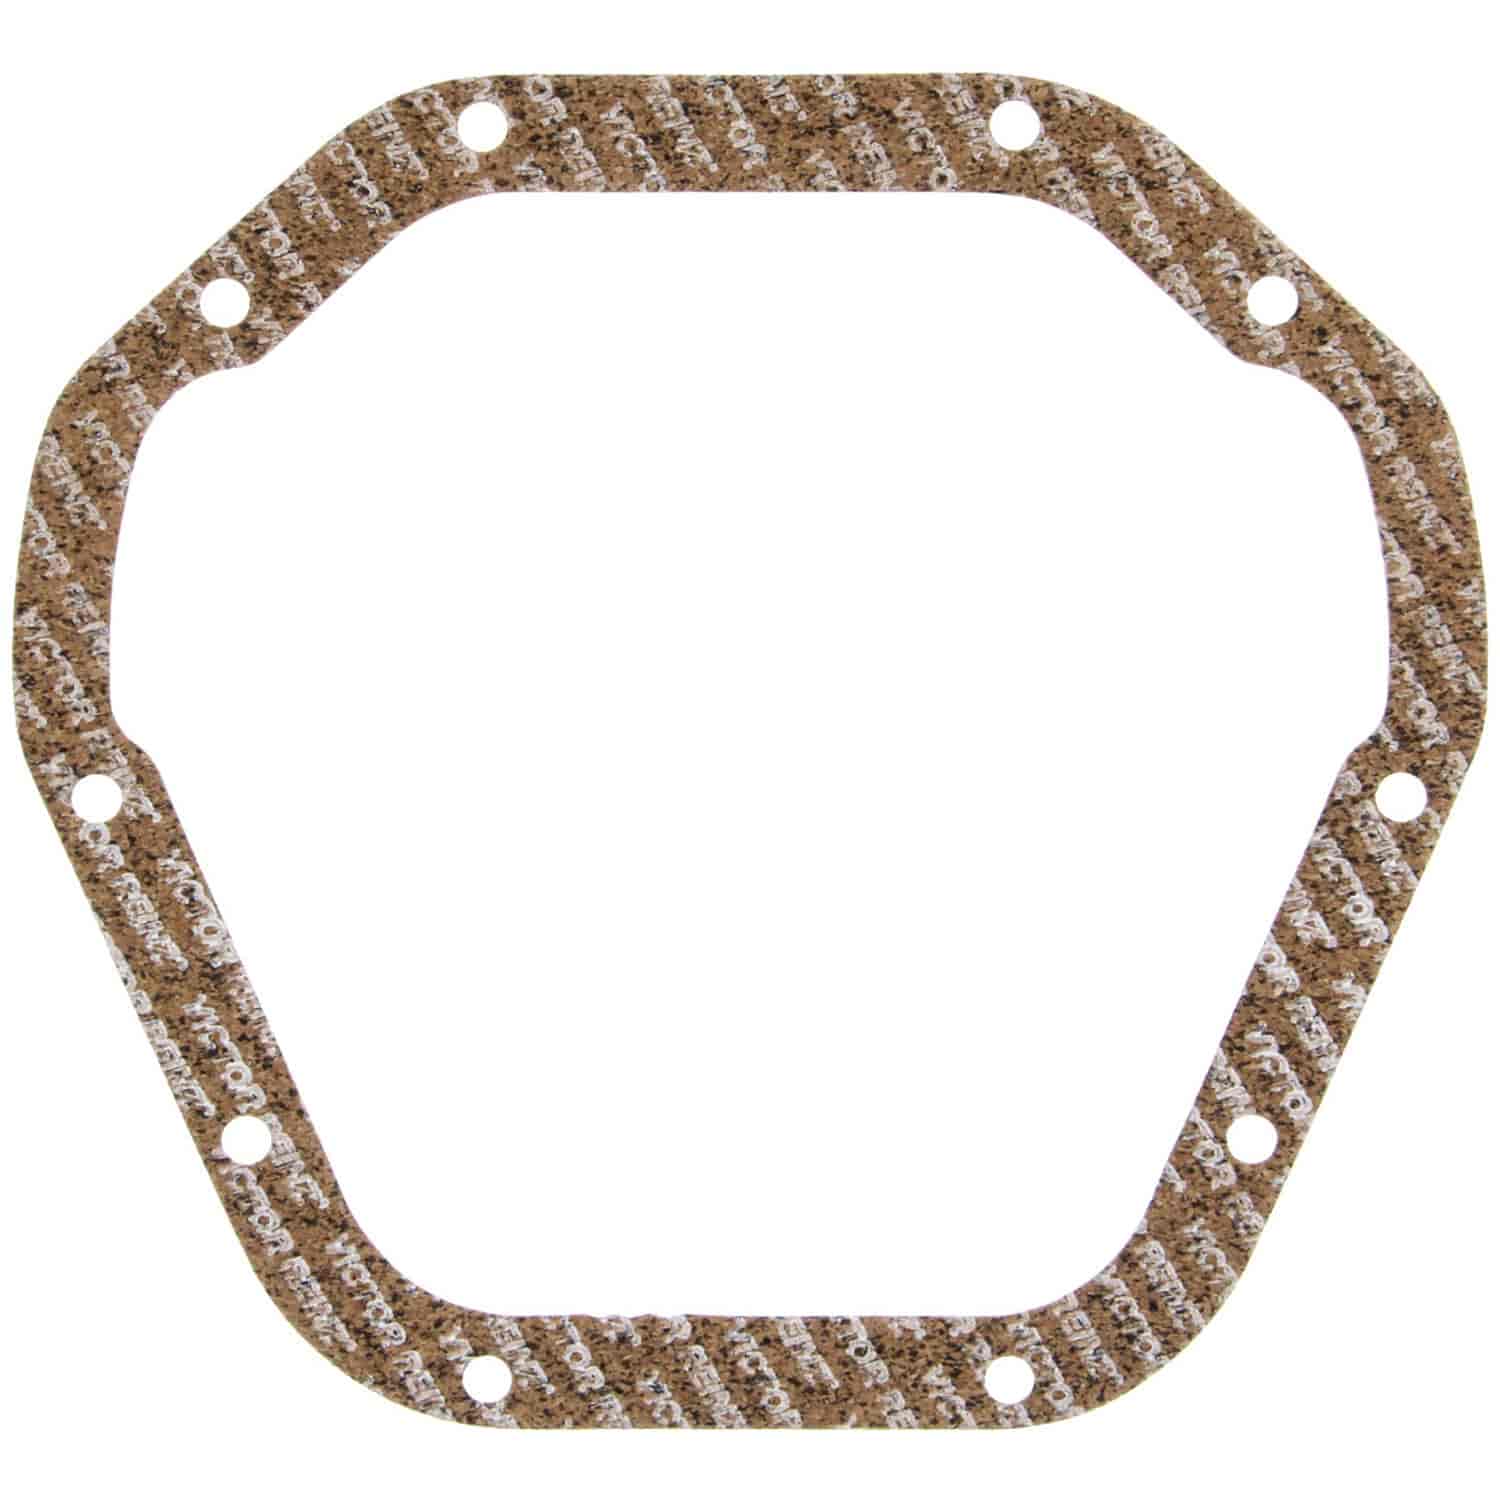 Axle Housing Cover Gasket Chev-Trk  Dod-Pass&Trk  Ford-Trk  GMC  IHC-Trk  Jeep  Ply-Pass 396 C20 G20 B200 E